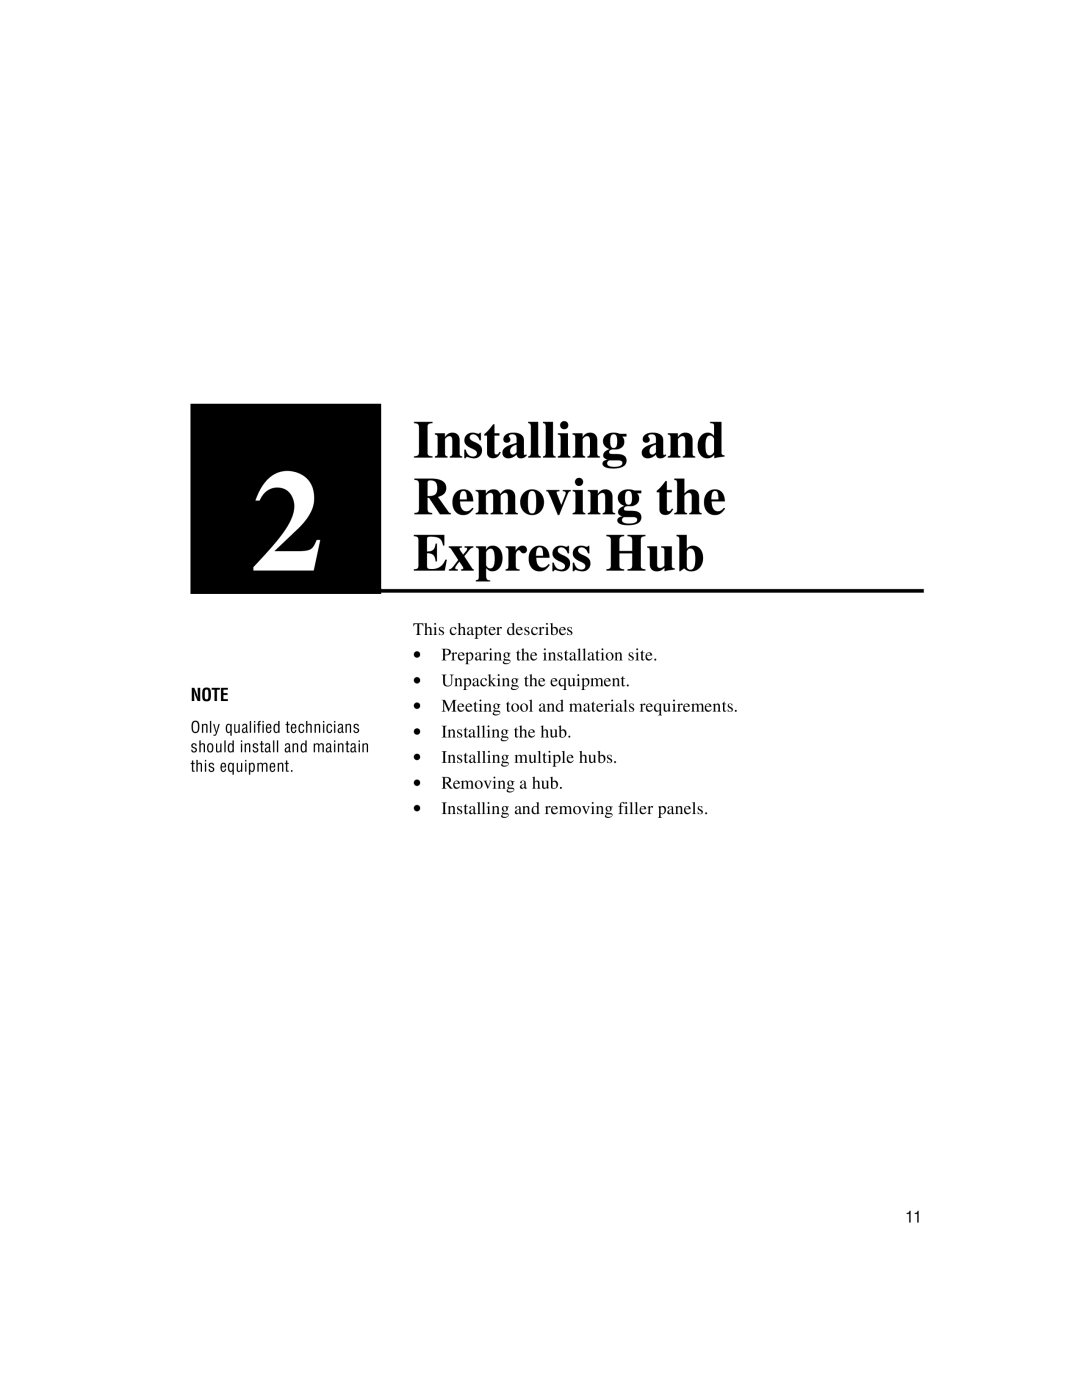 Intel 100BASE-TX manual Installing and Removing the Express Hub, This chapter describes, ∙Preparing the installation site 